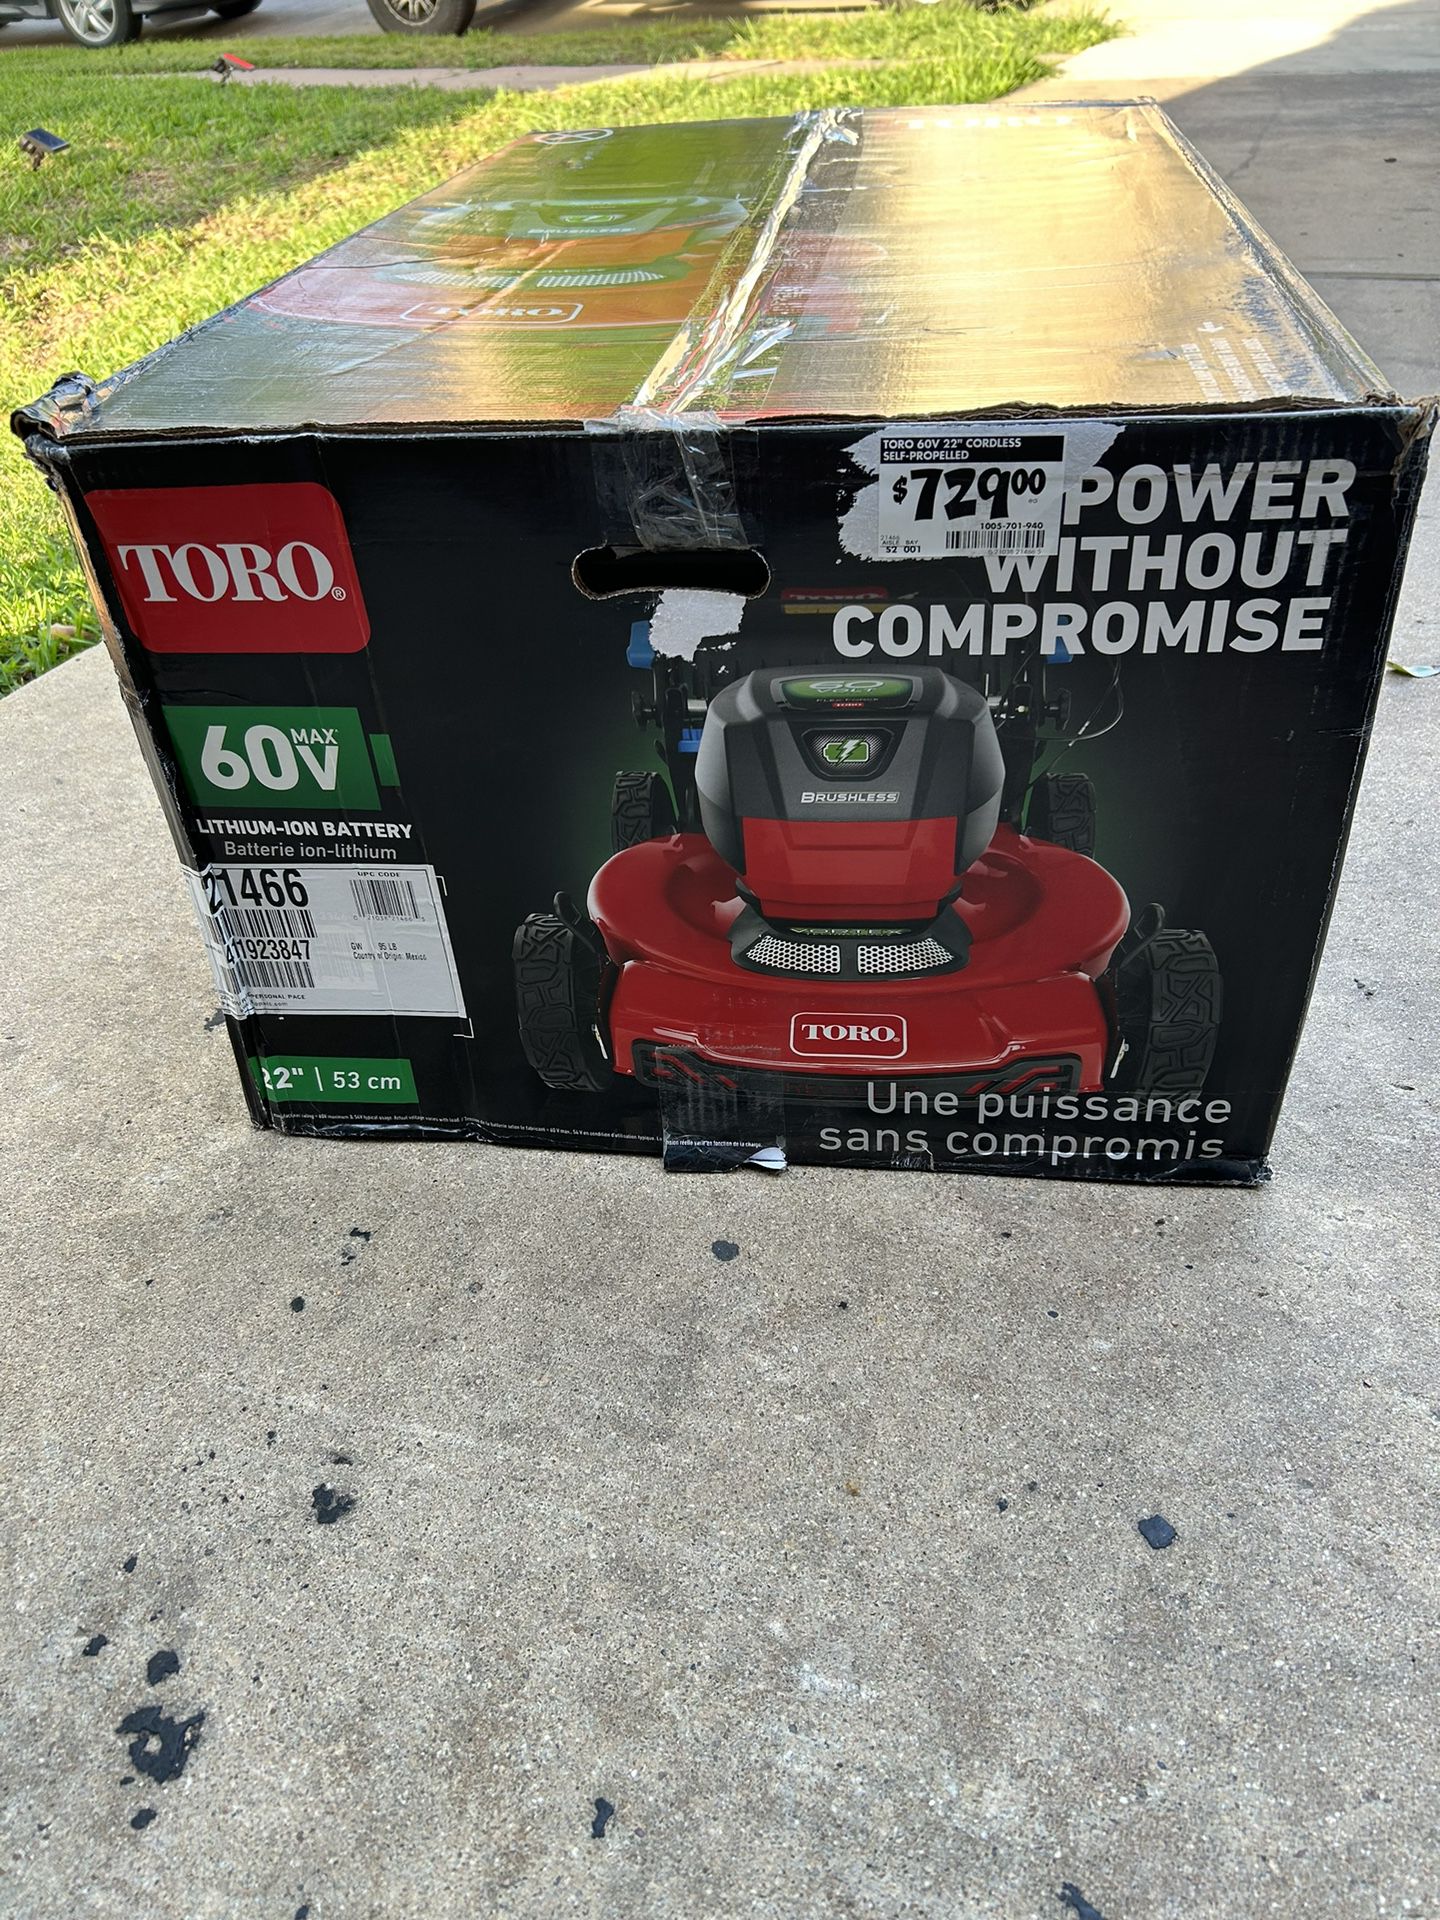 Toro Recycler 60V Max Lawn Mower Brand Kit With Battery And Charger